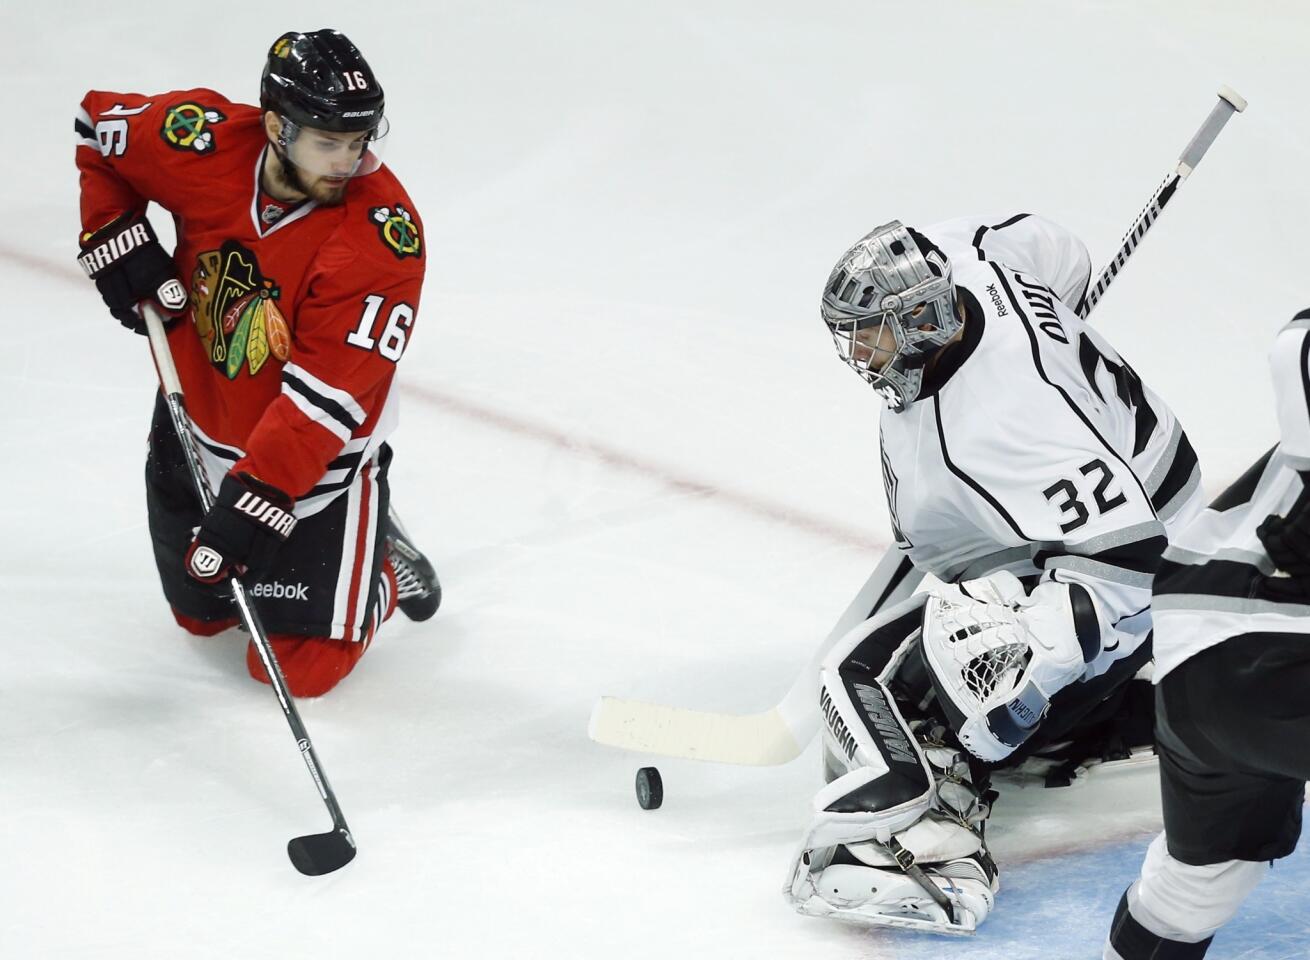 Jonathan Quick, Marcus Kruger